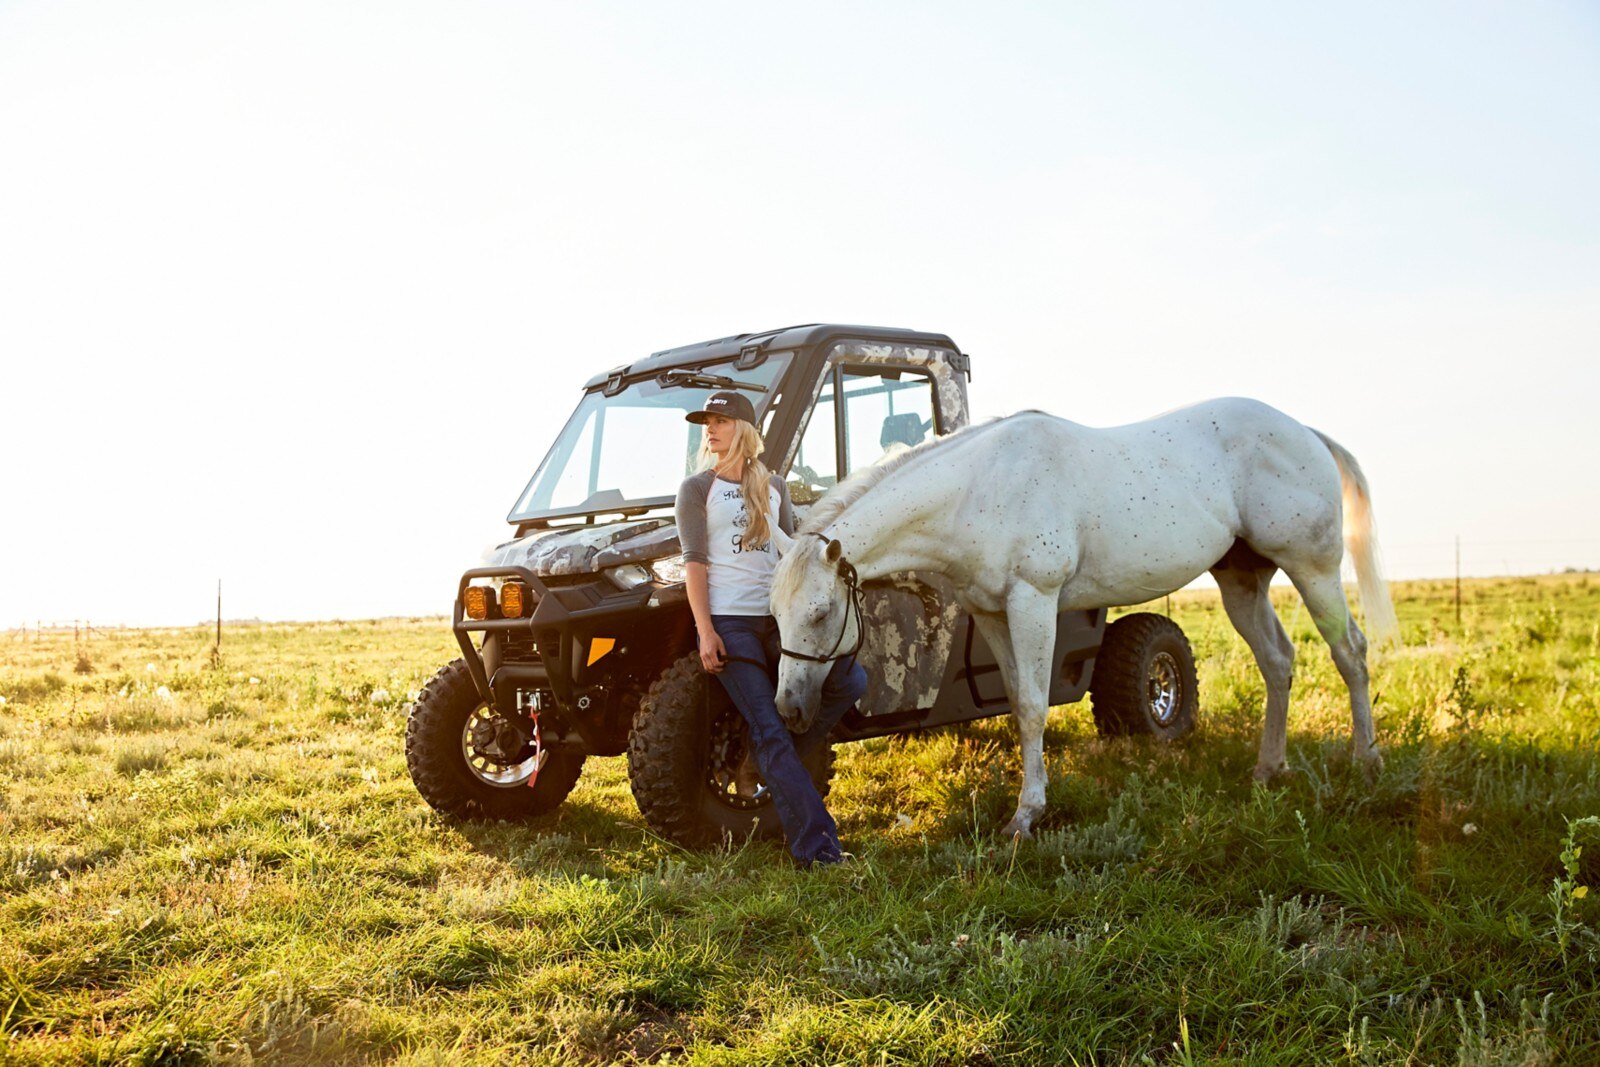 Kristy Lee Cook standing with her horse and Defender in a field, staring into the distance. 